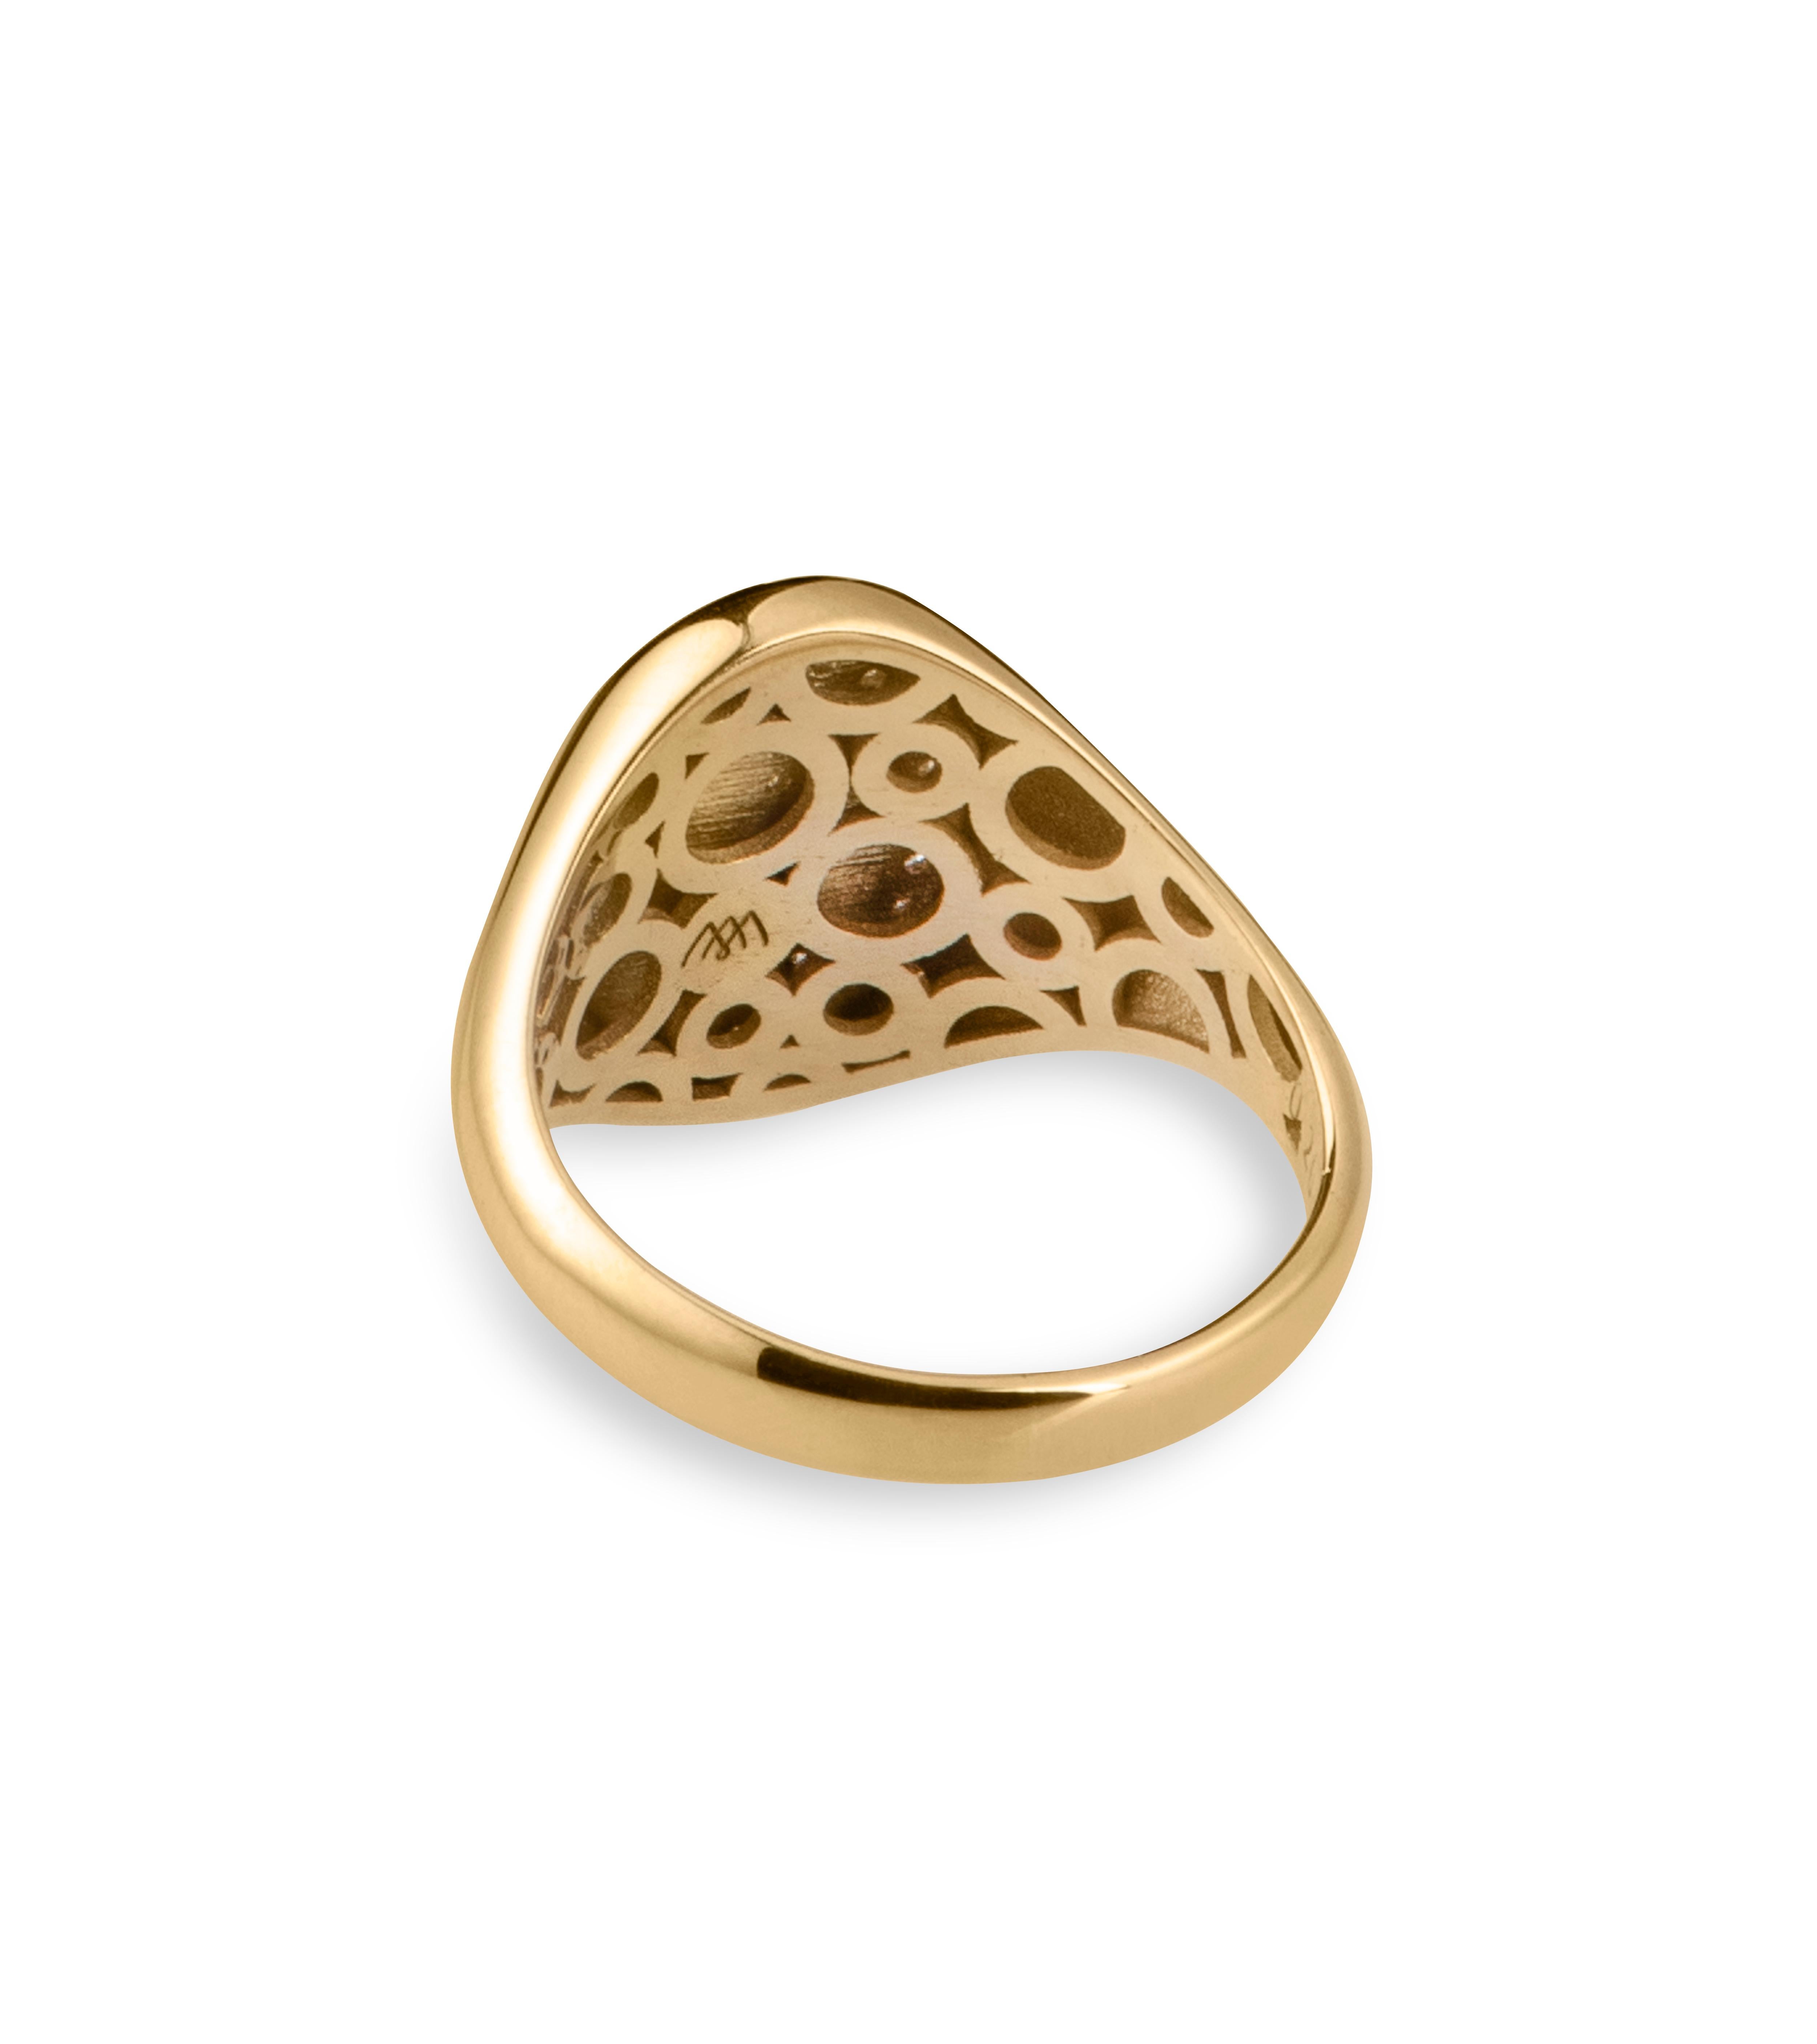 Glimmer Initial Signet Ring, Natural Diamonds 18K Gold 2